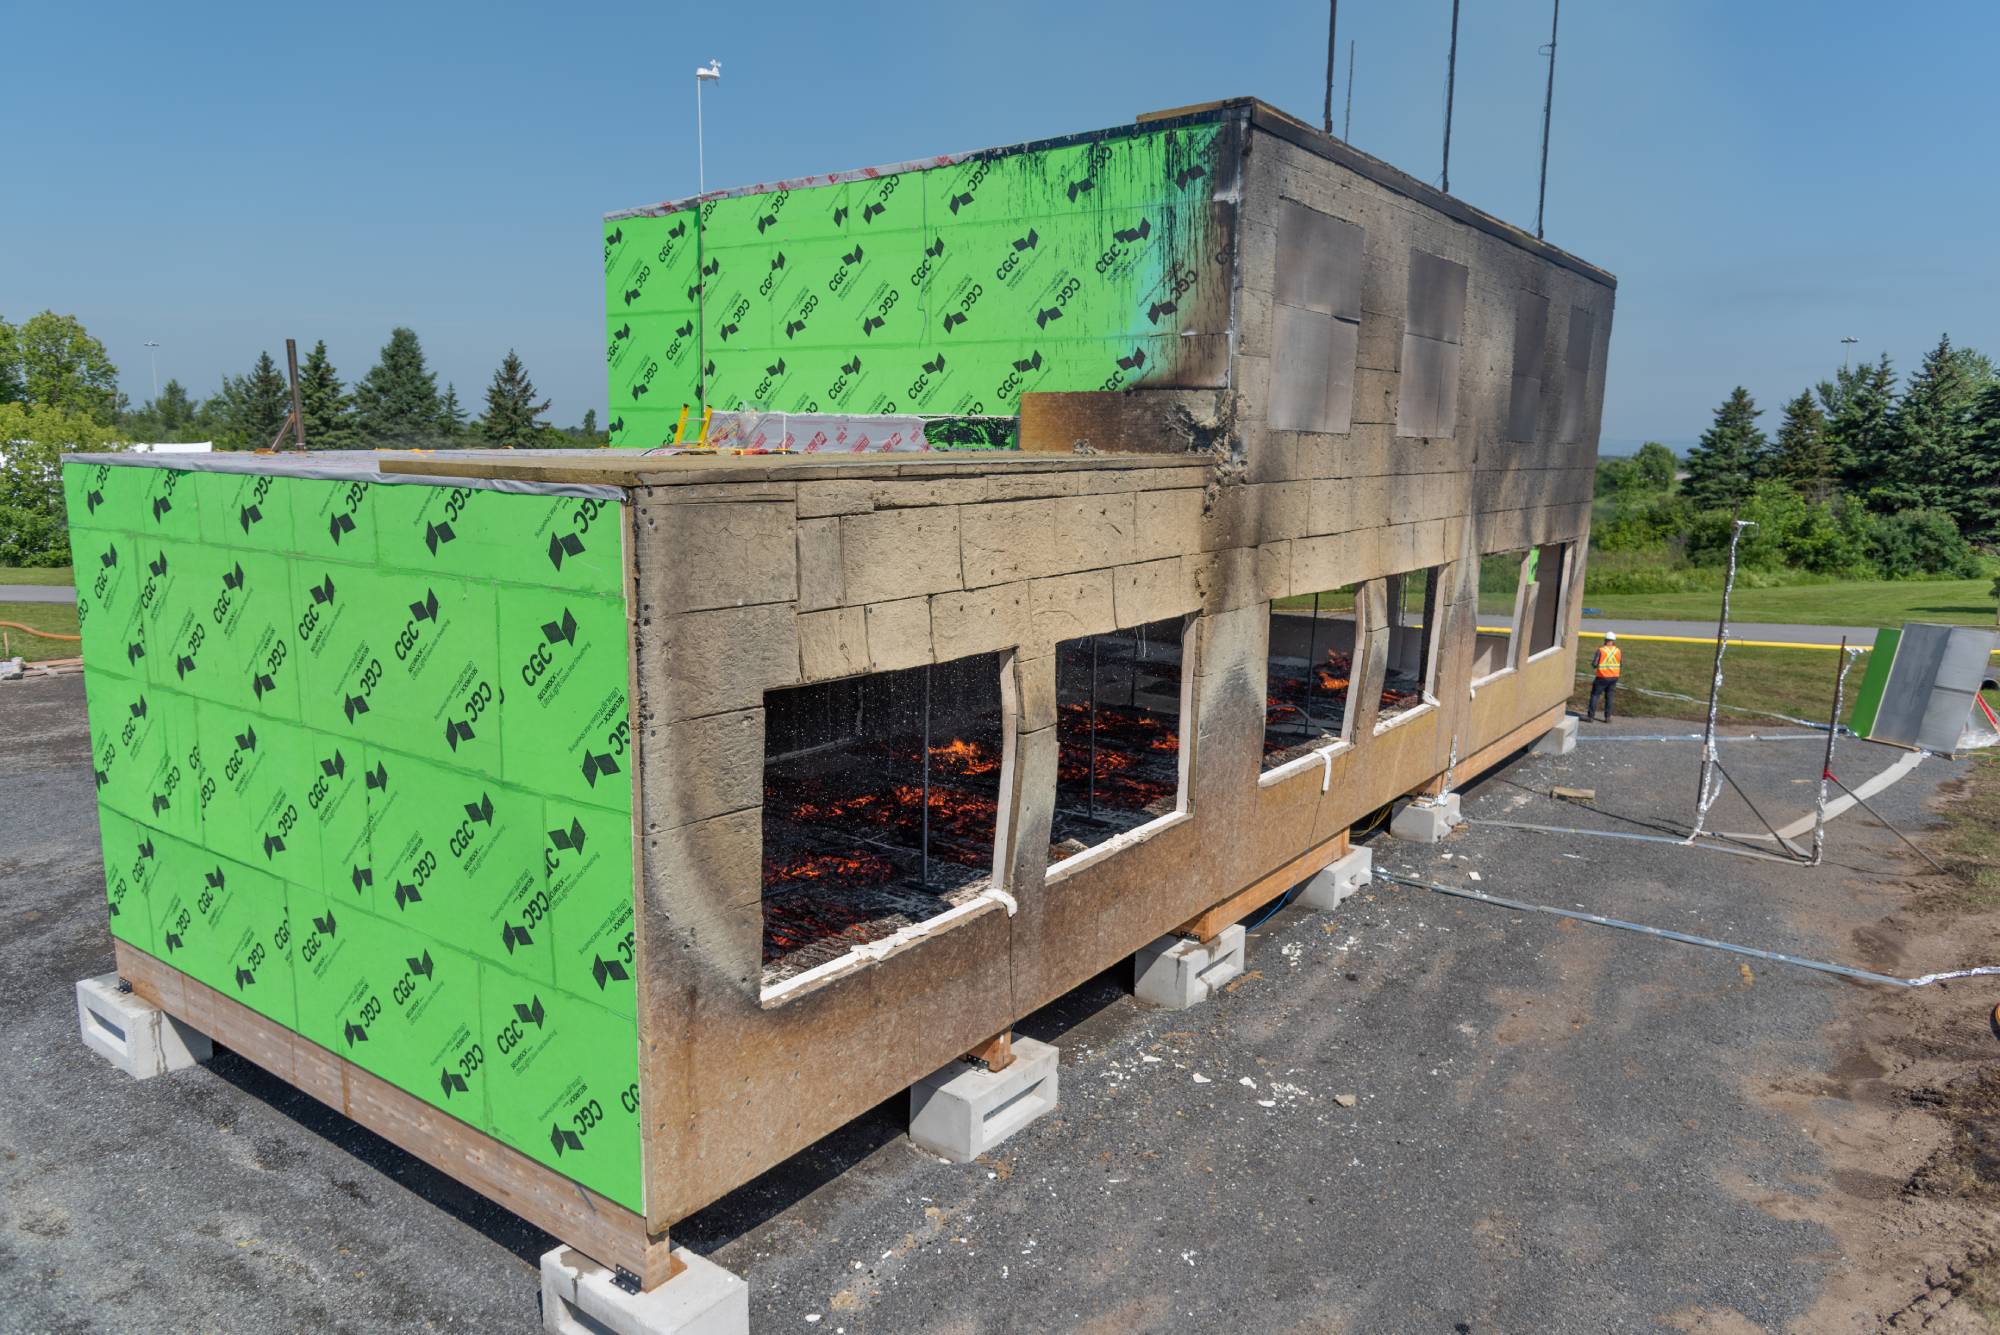 Mass timber building in the late stages of fire testing, with smoldering in the interior.